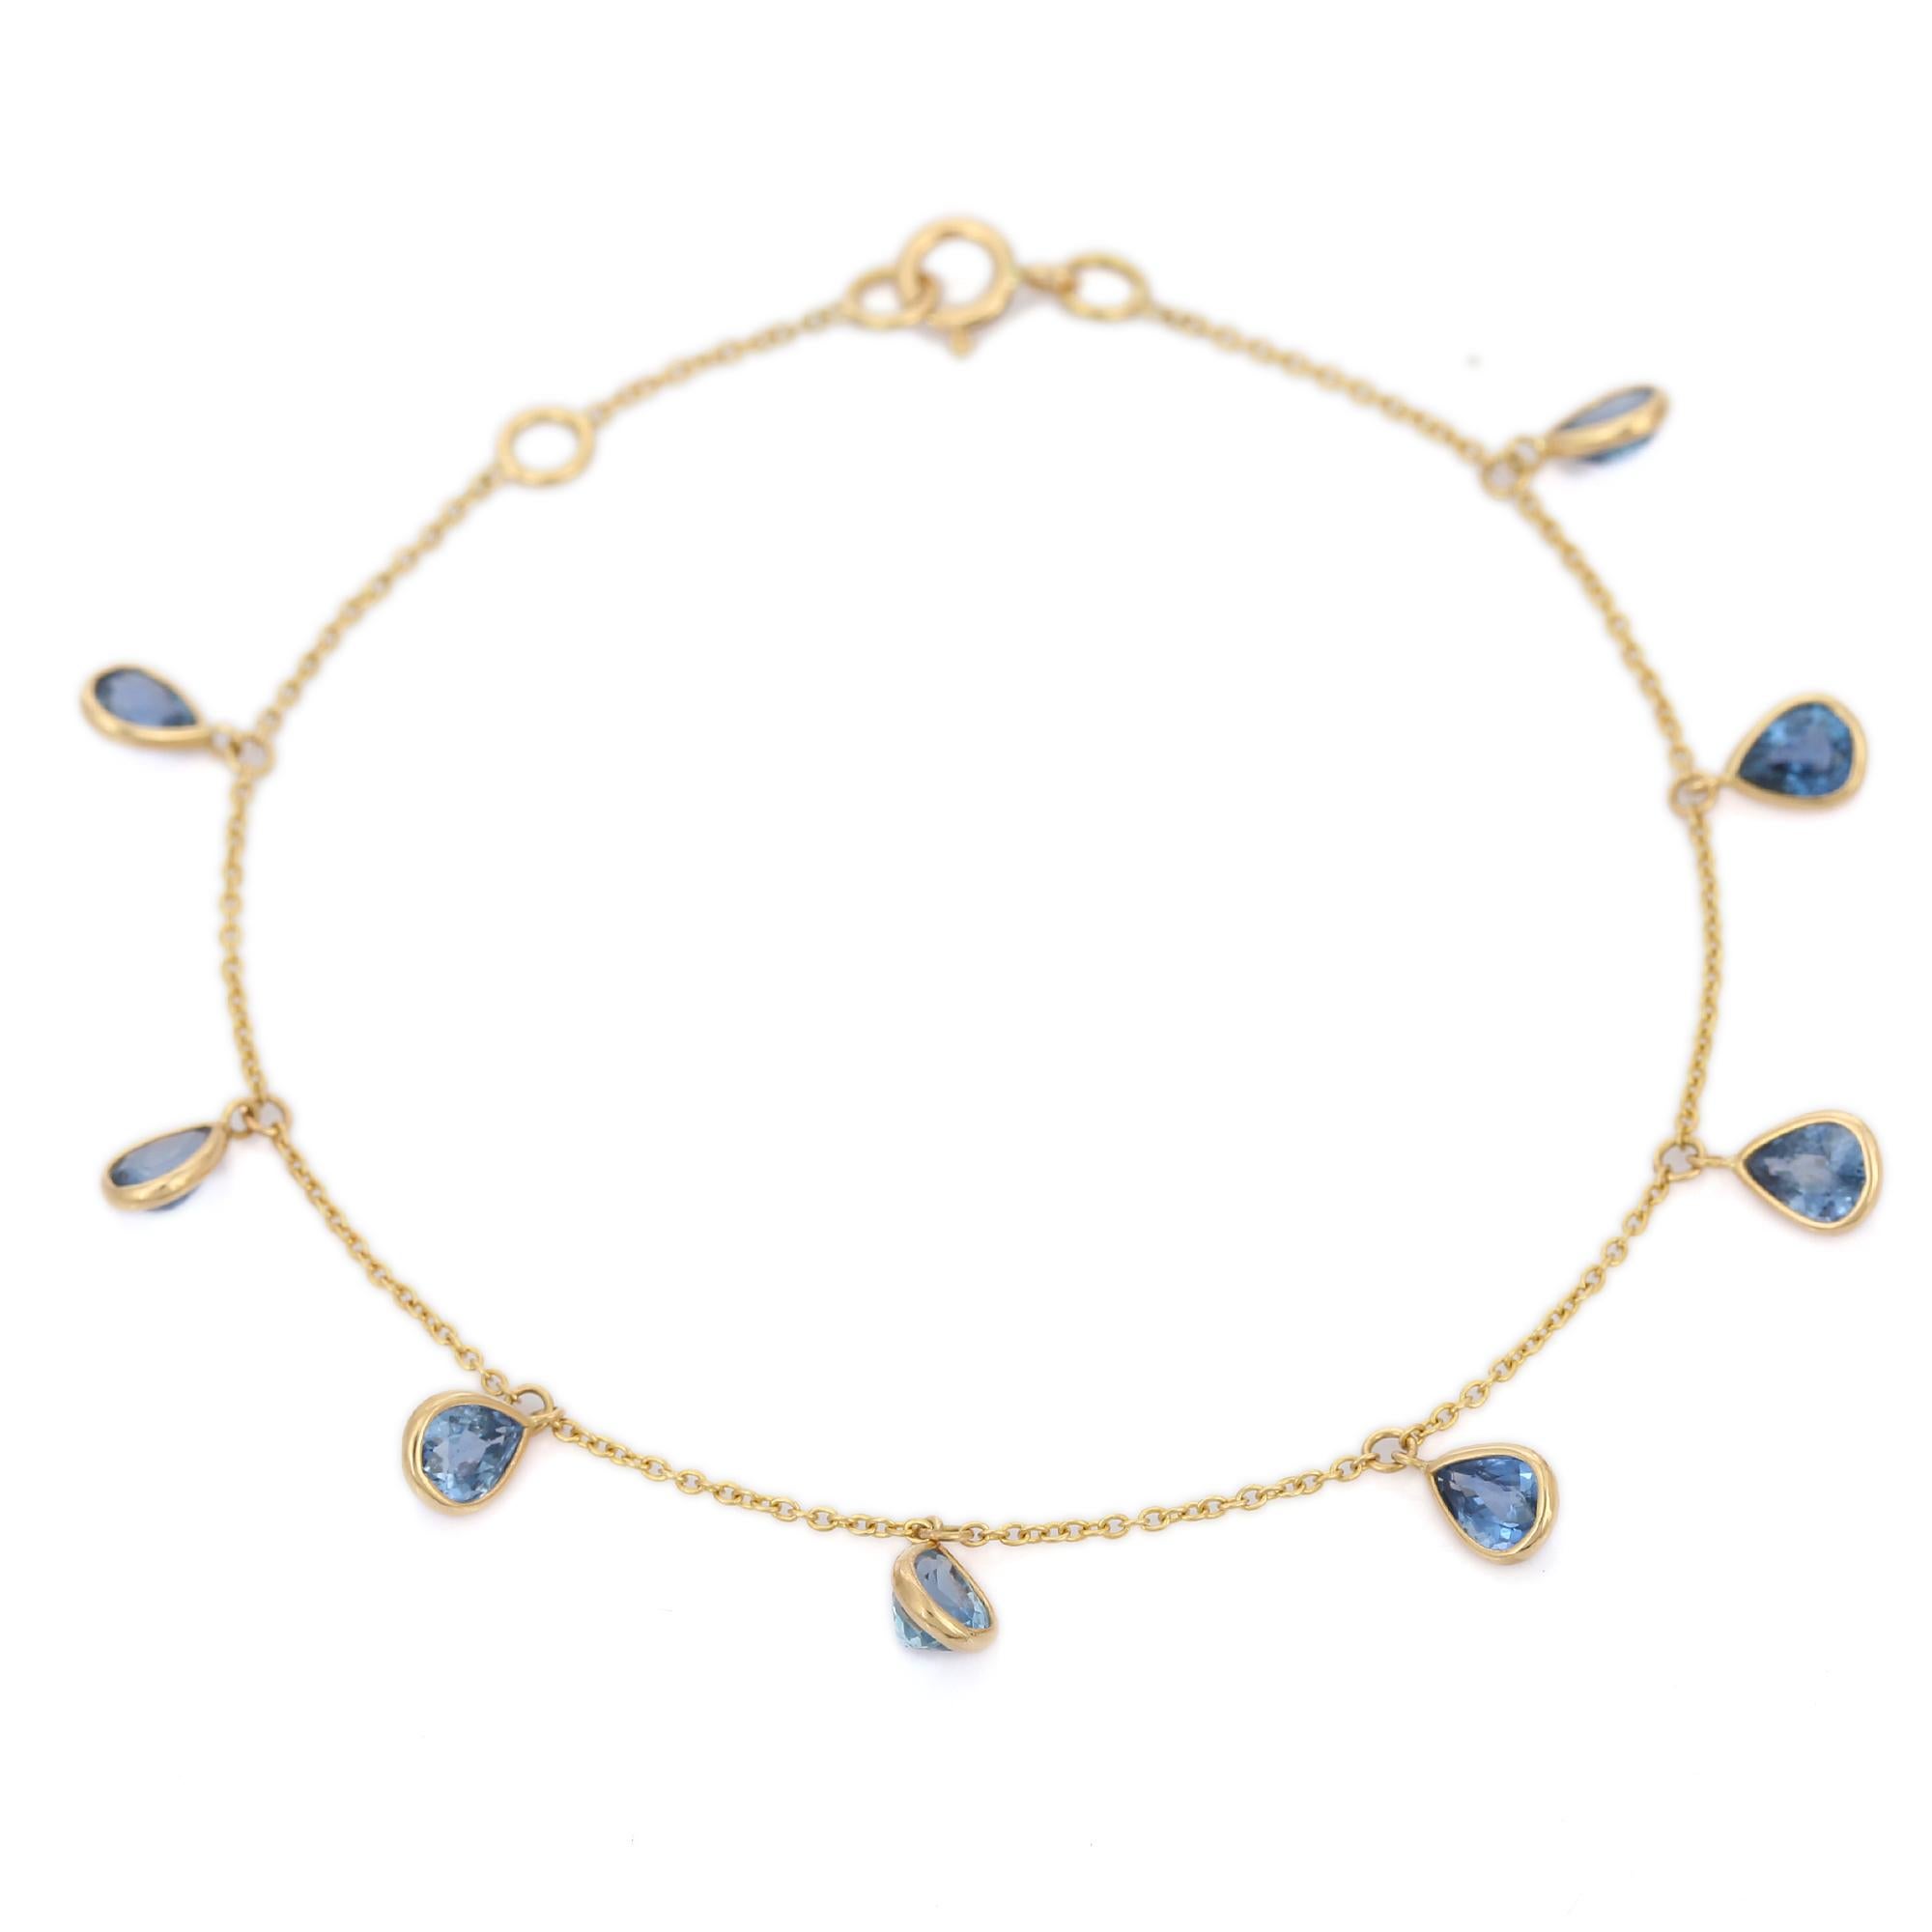 3.44 Carat Blue Sapphire Chain Bracelet in 18K Yellow Gold For Sale